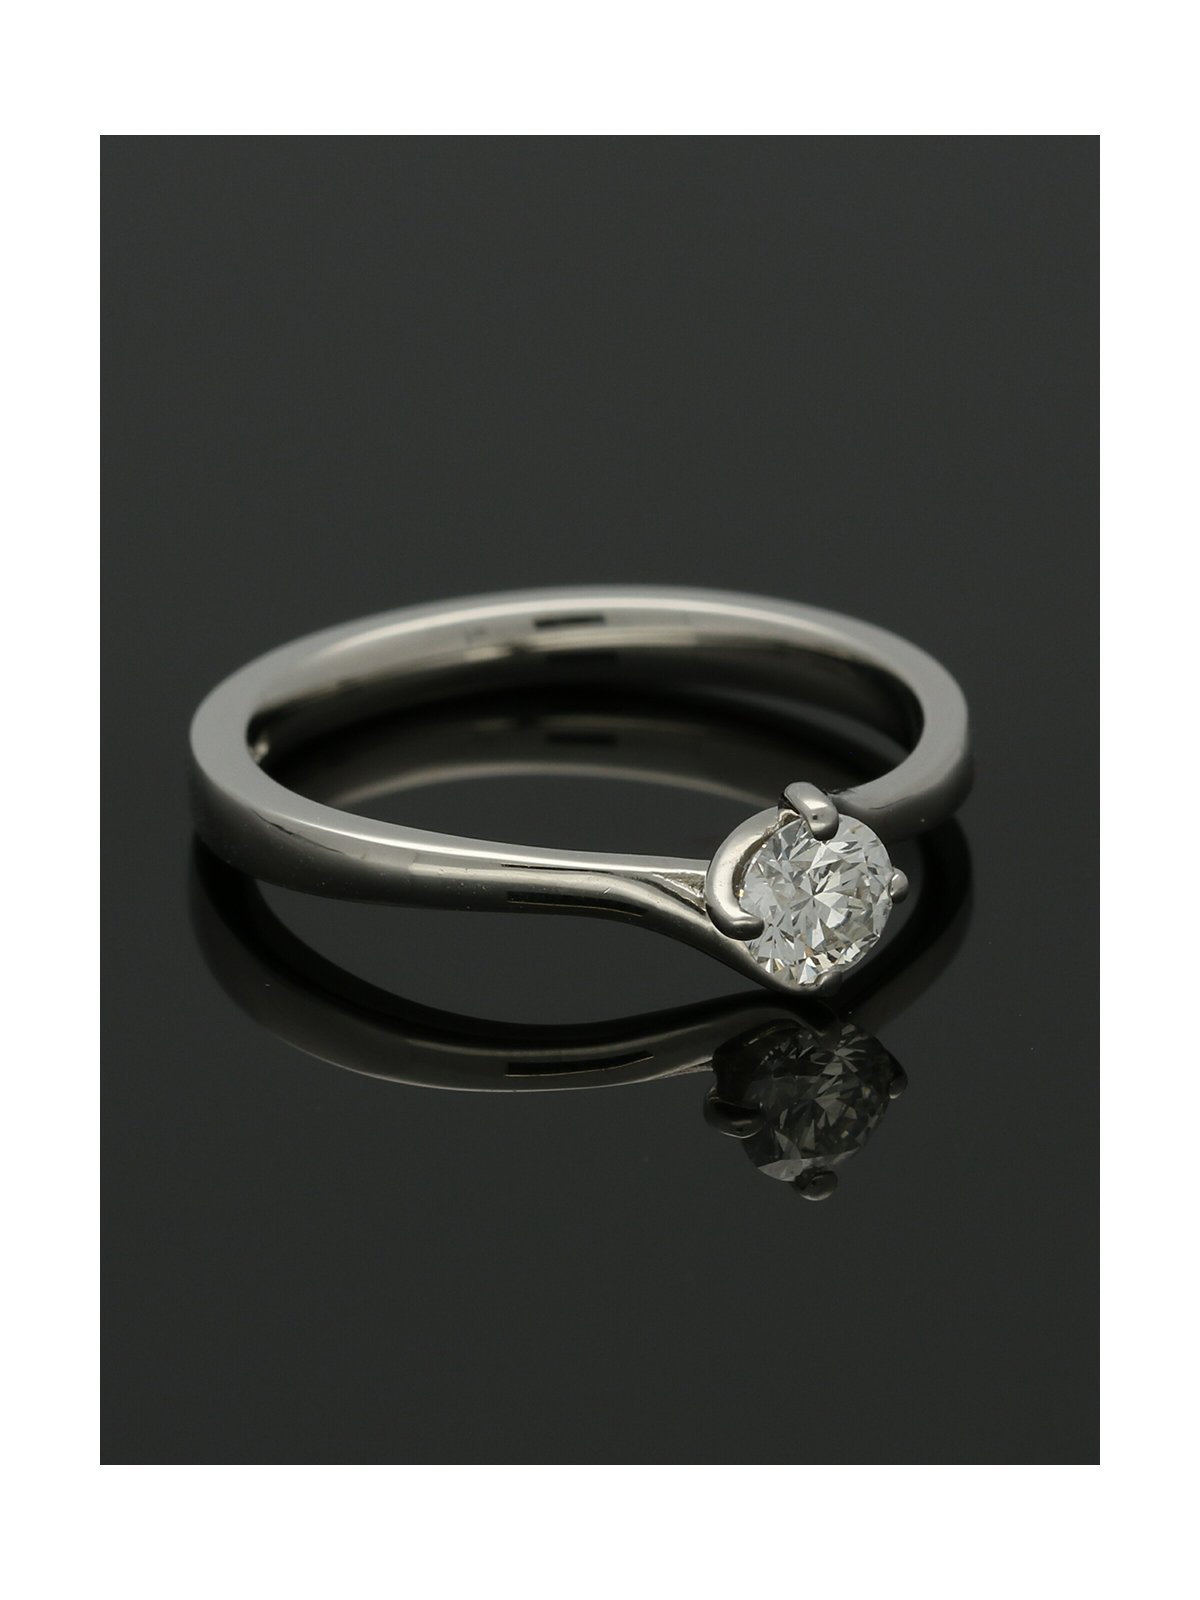 Diamond Solitaire Engagement Ring "The Adelaide Collection" 0.33ct Round Brilliant Cut in Platinum